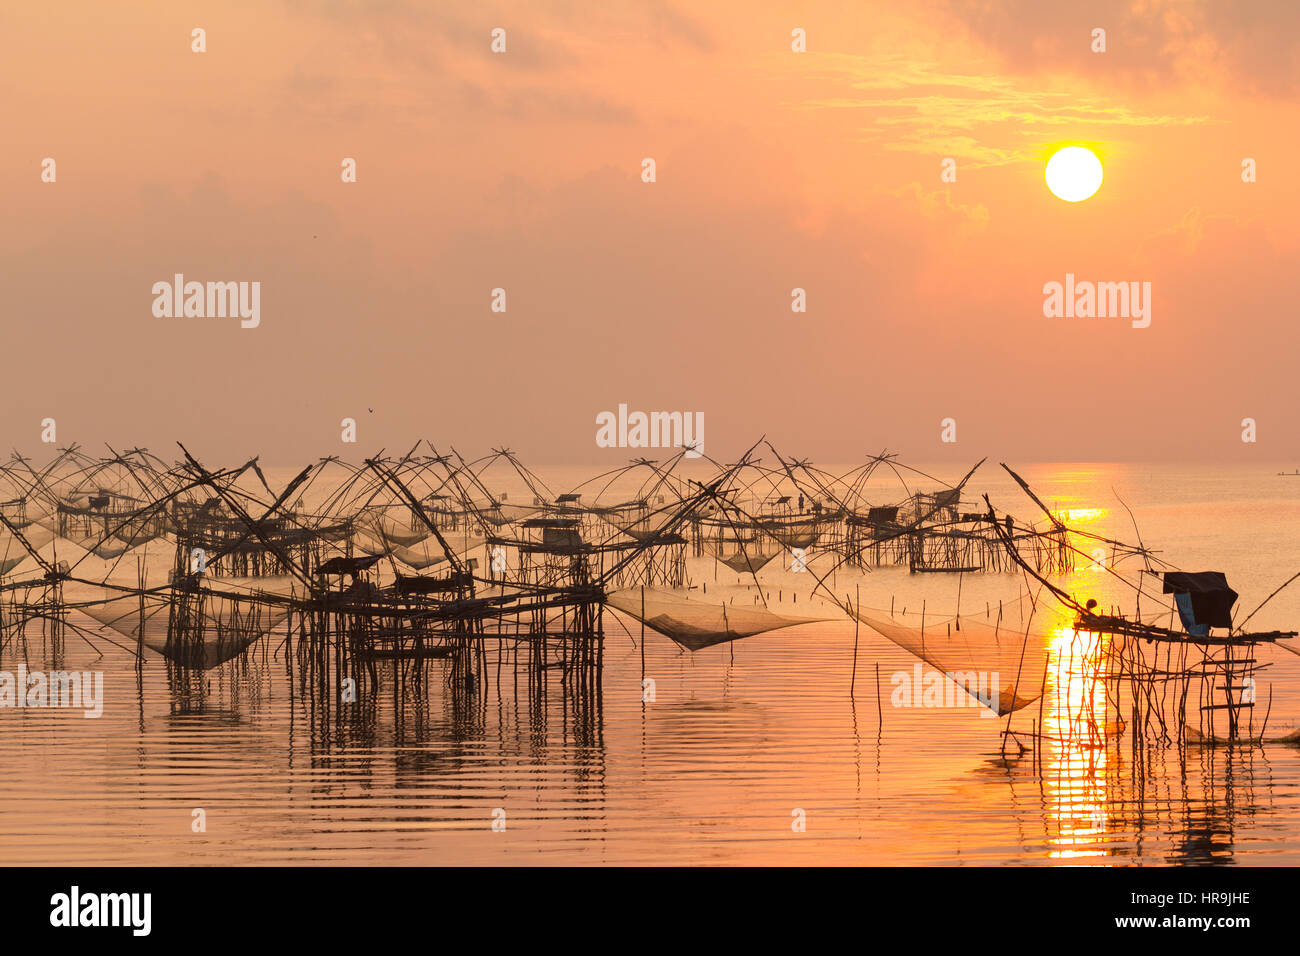 Fishing nets in the lake in Southern part of Thailand in gold warm morning light Stock Photo